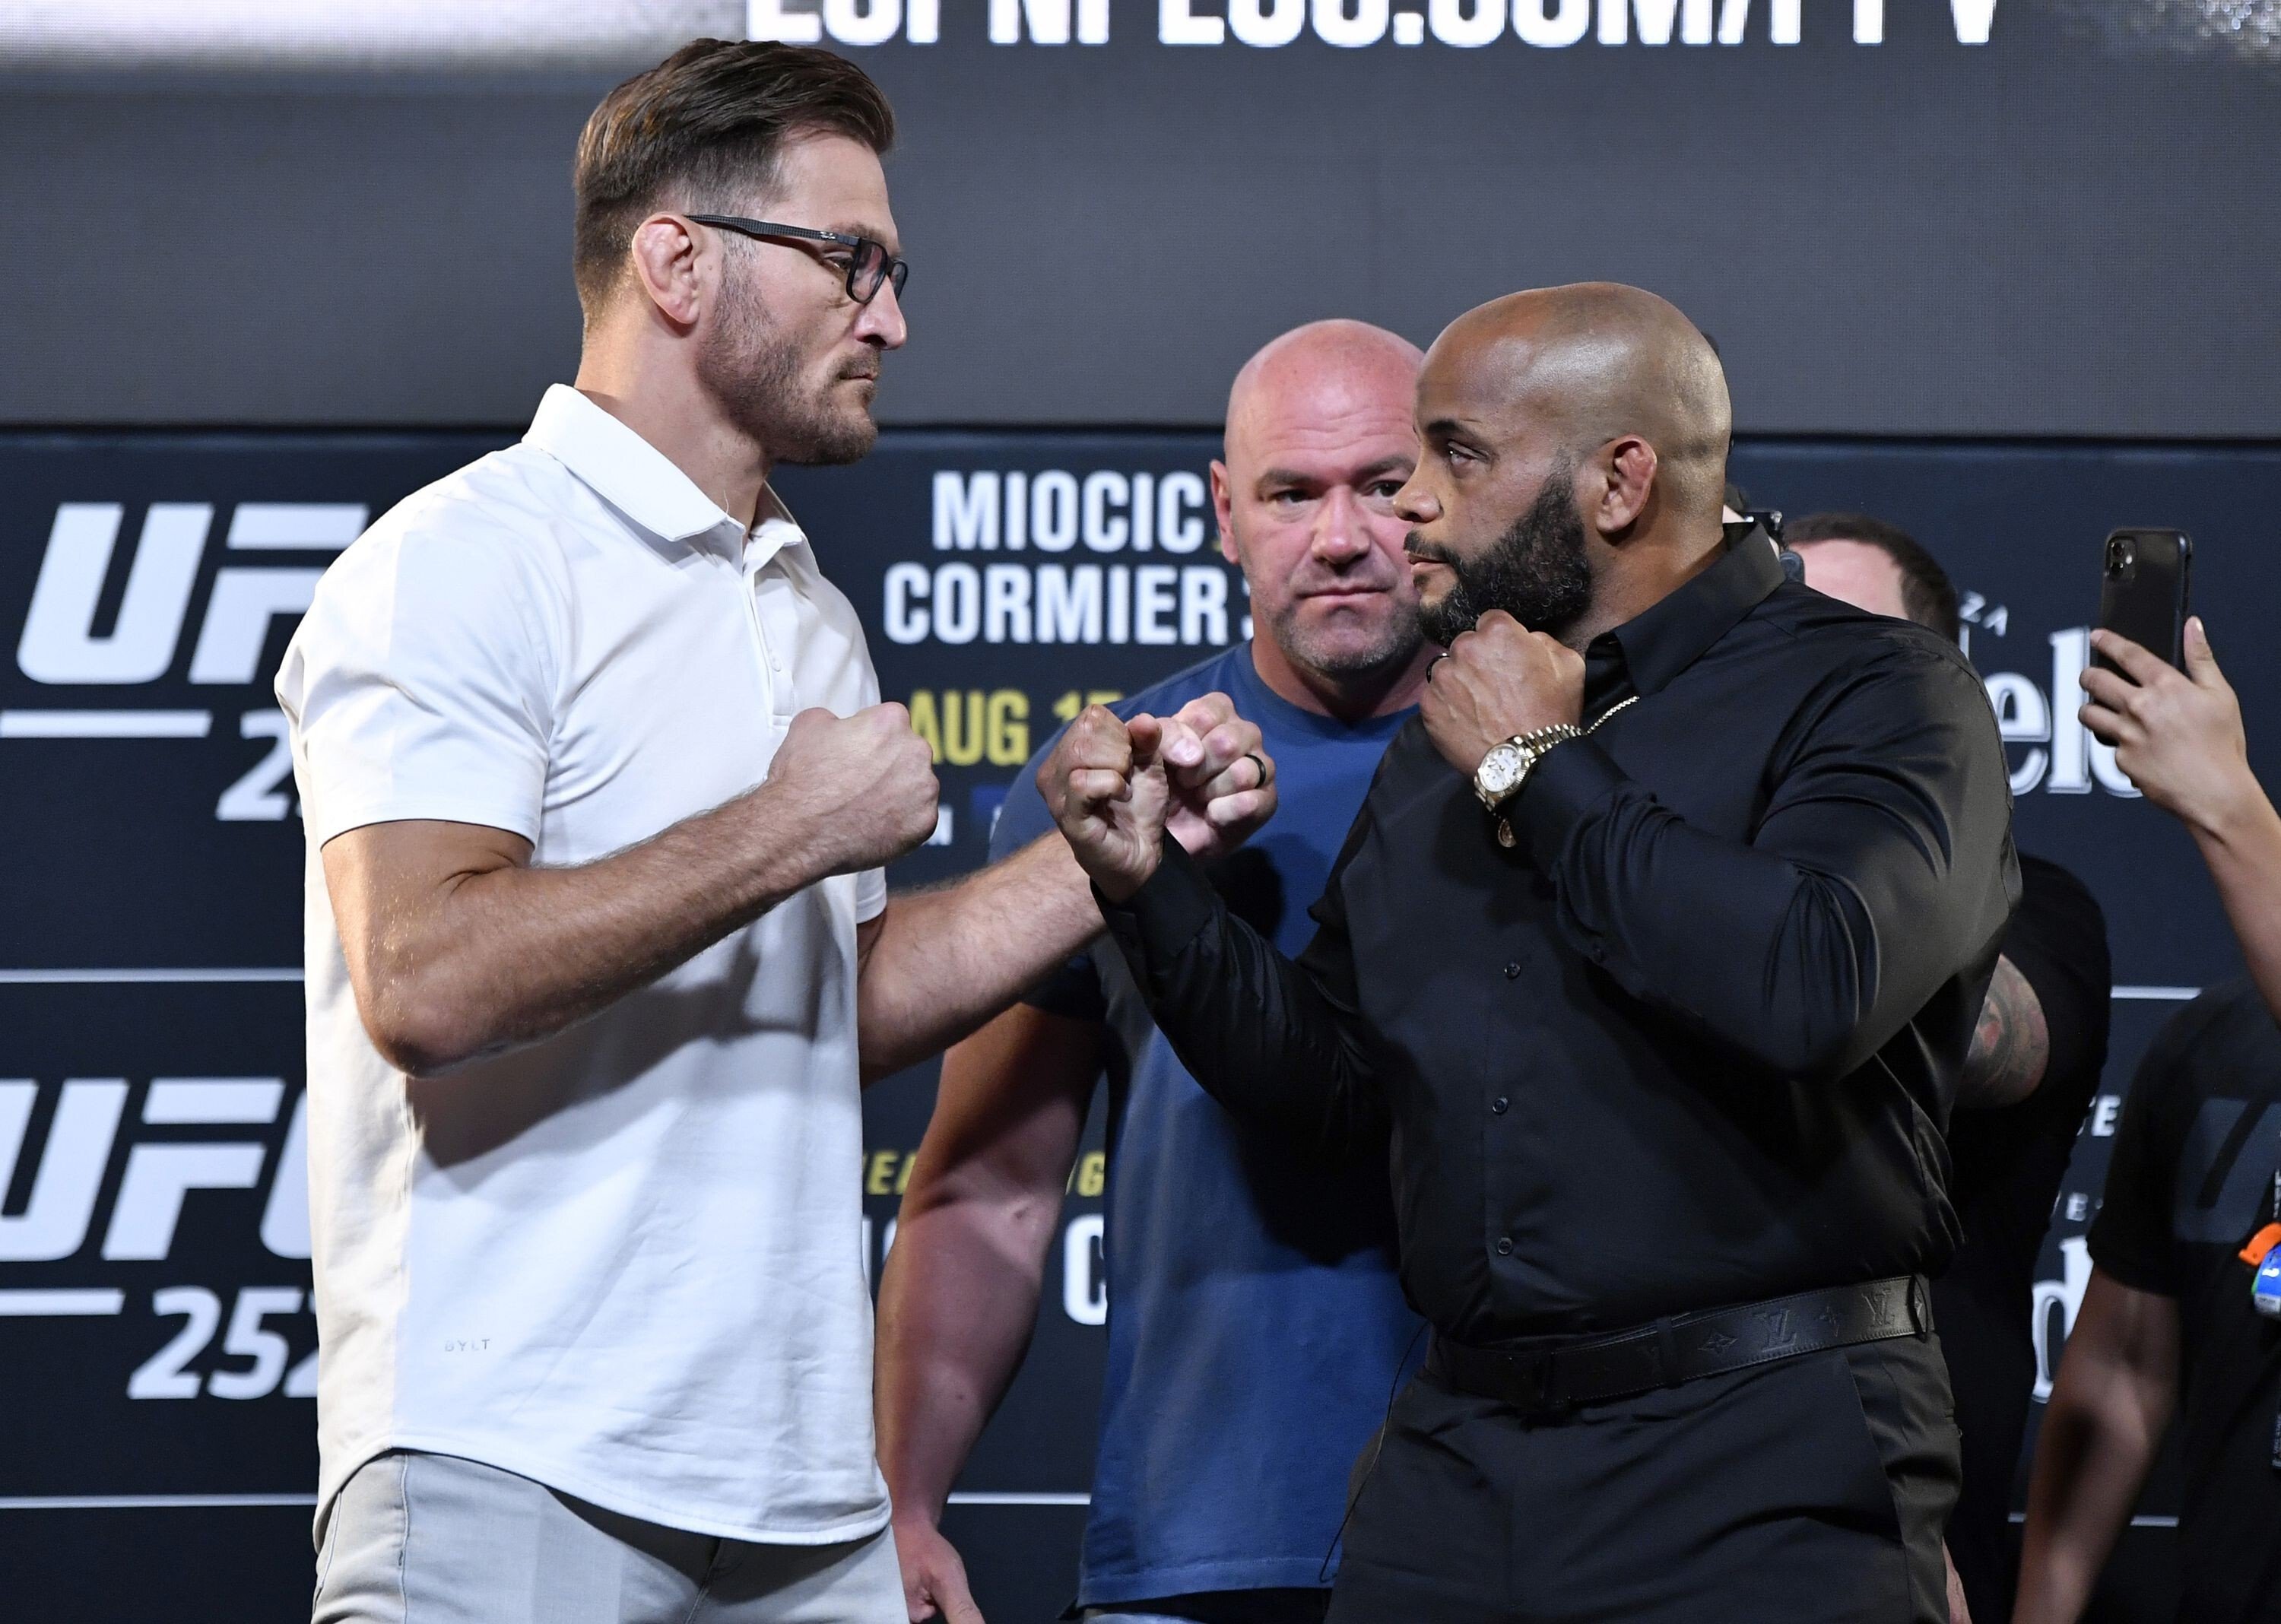 Stipe Miocic and Daniel Cormier face off during the UFC 252 press conference at the UFC Apex on August 13, 2020 in Las Vegas, Nevada. Photo: Jeff Bottari/Zuffa LLC